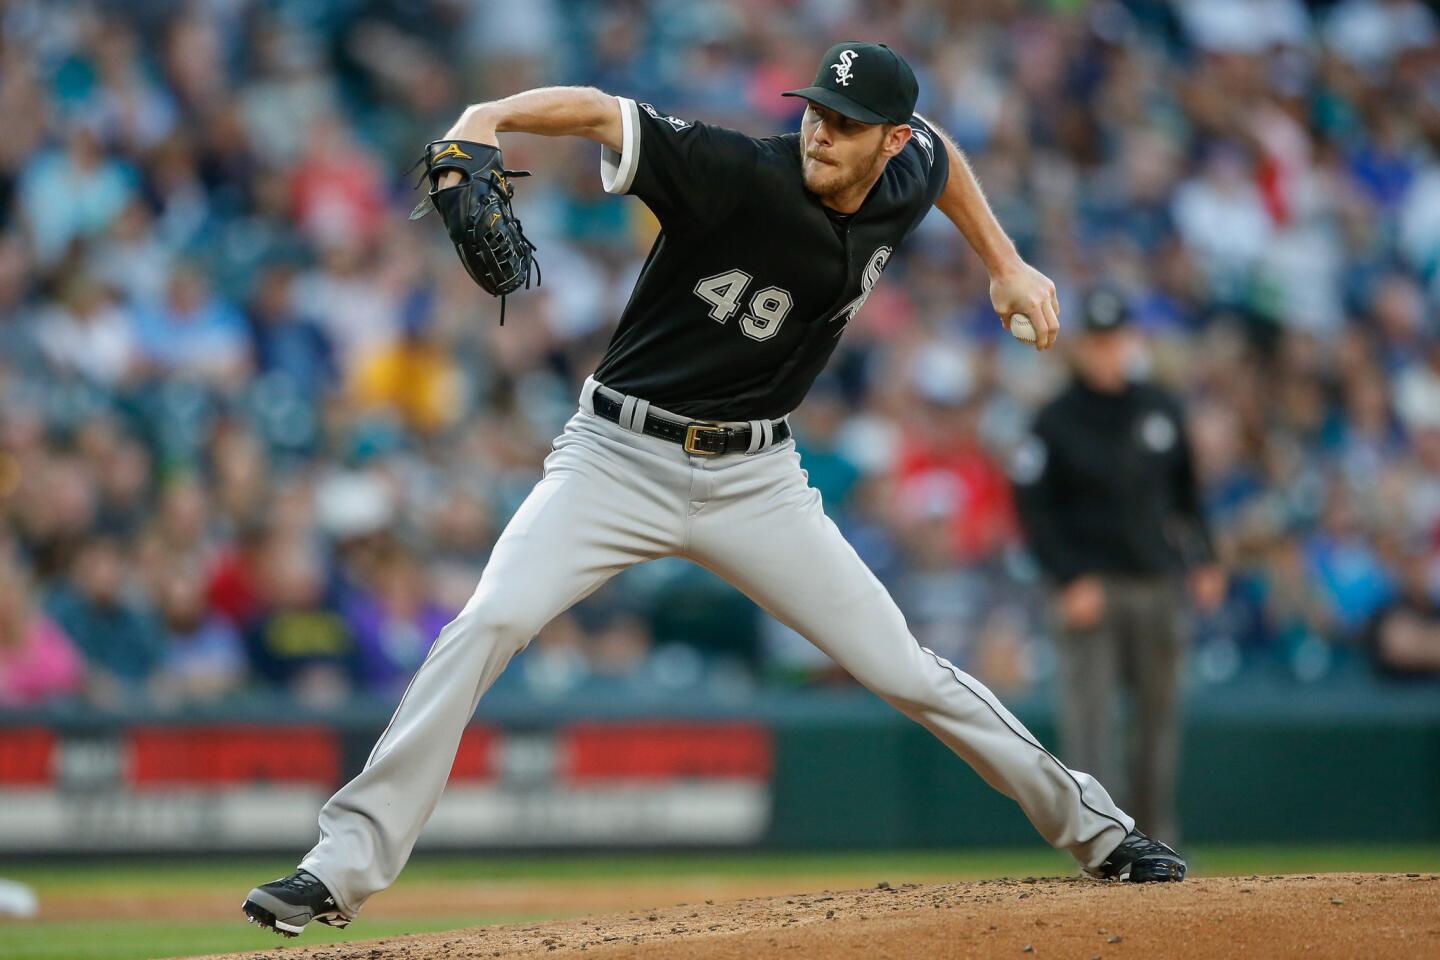 Starting pitcher Chris Sale of the White Sox pitches against the Seattle Mariners in the first inning.